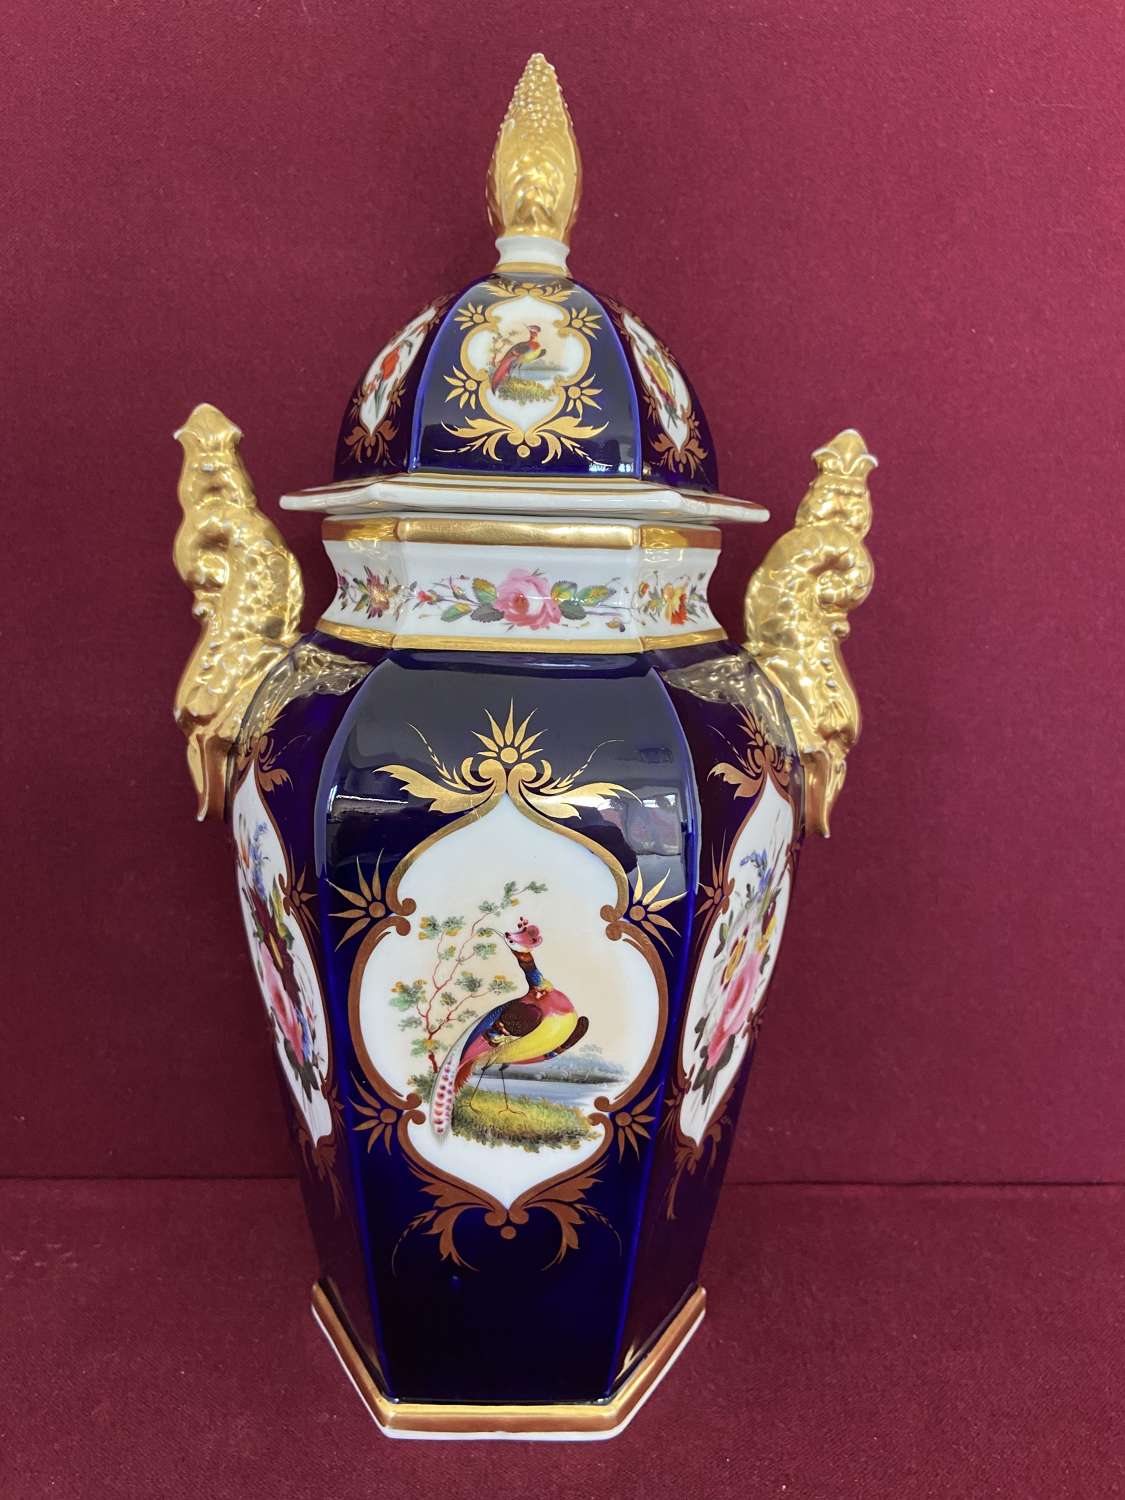 A Chamberlain Worcester Porcelain vase and cover c.1830-1840